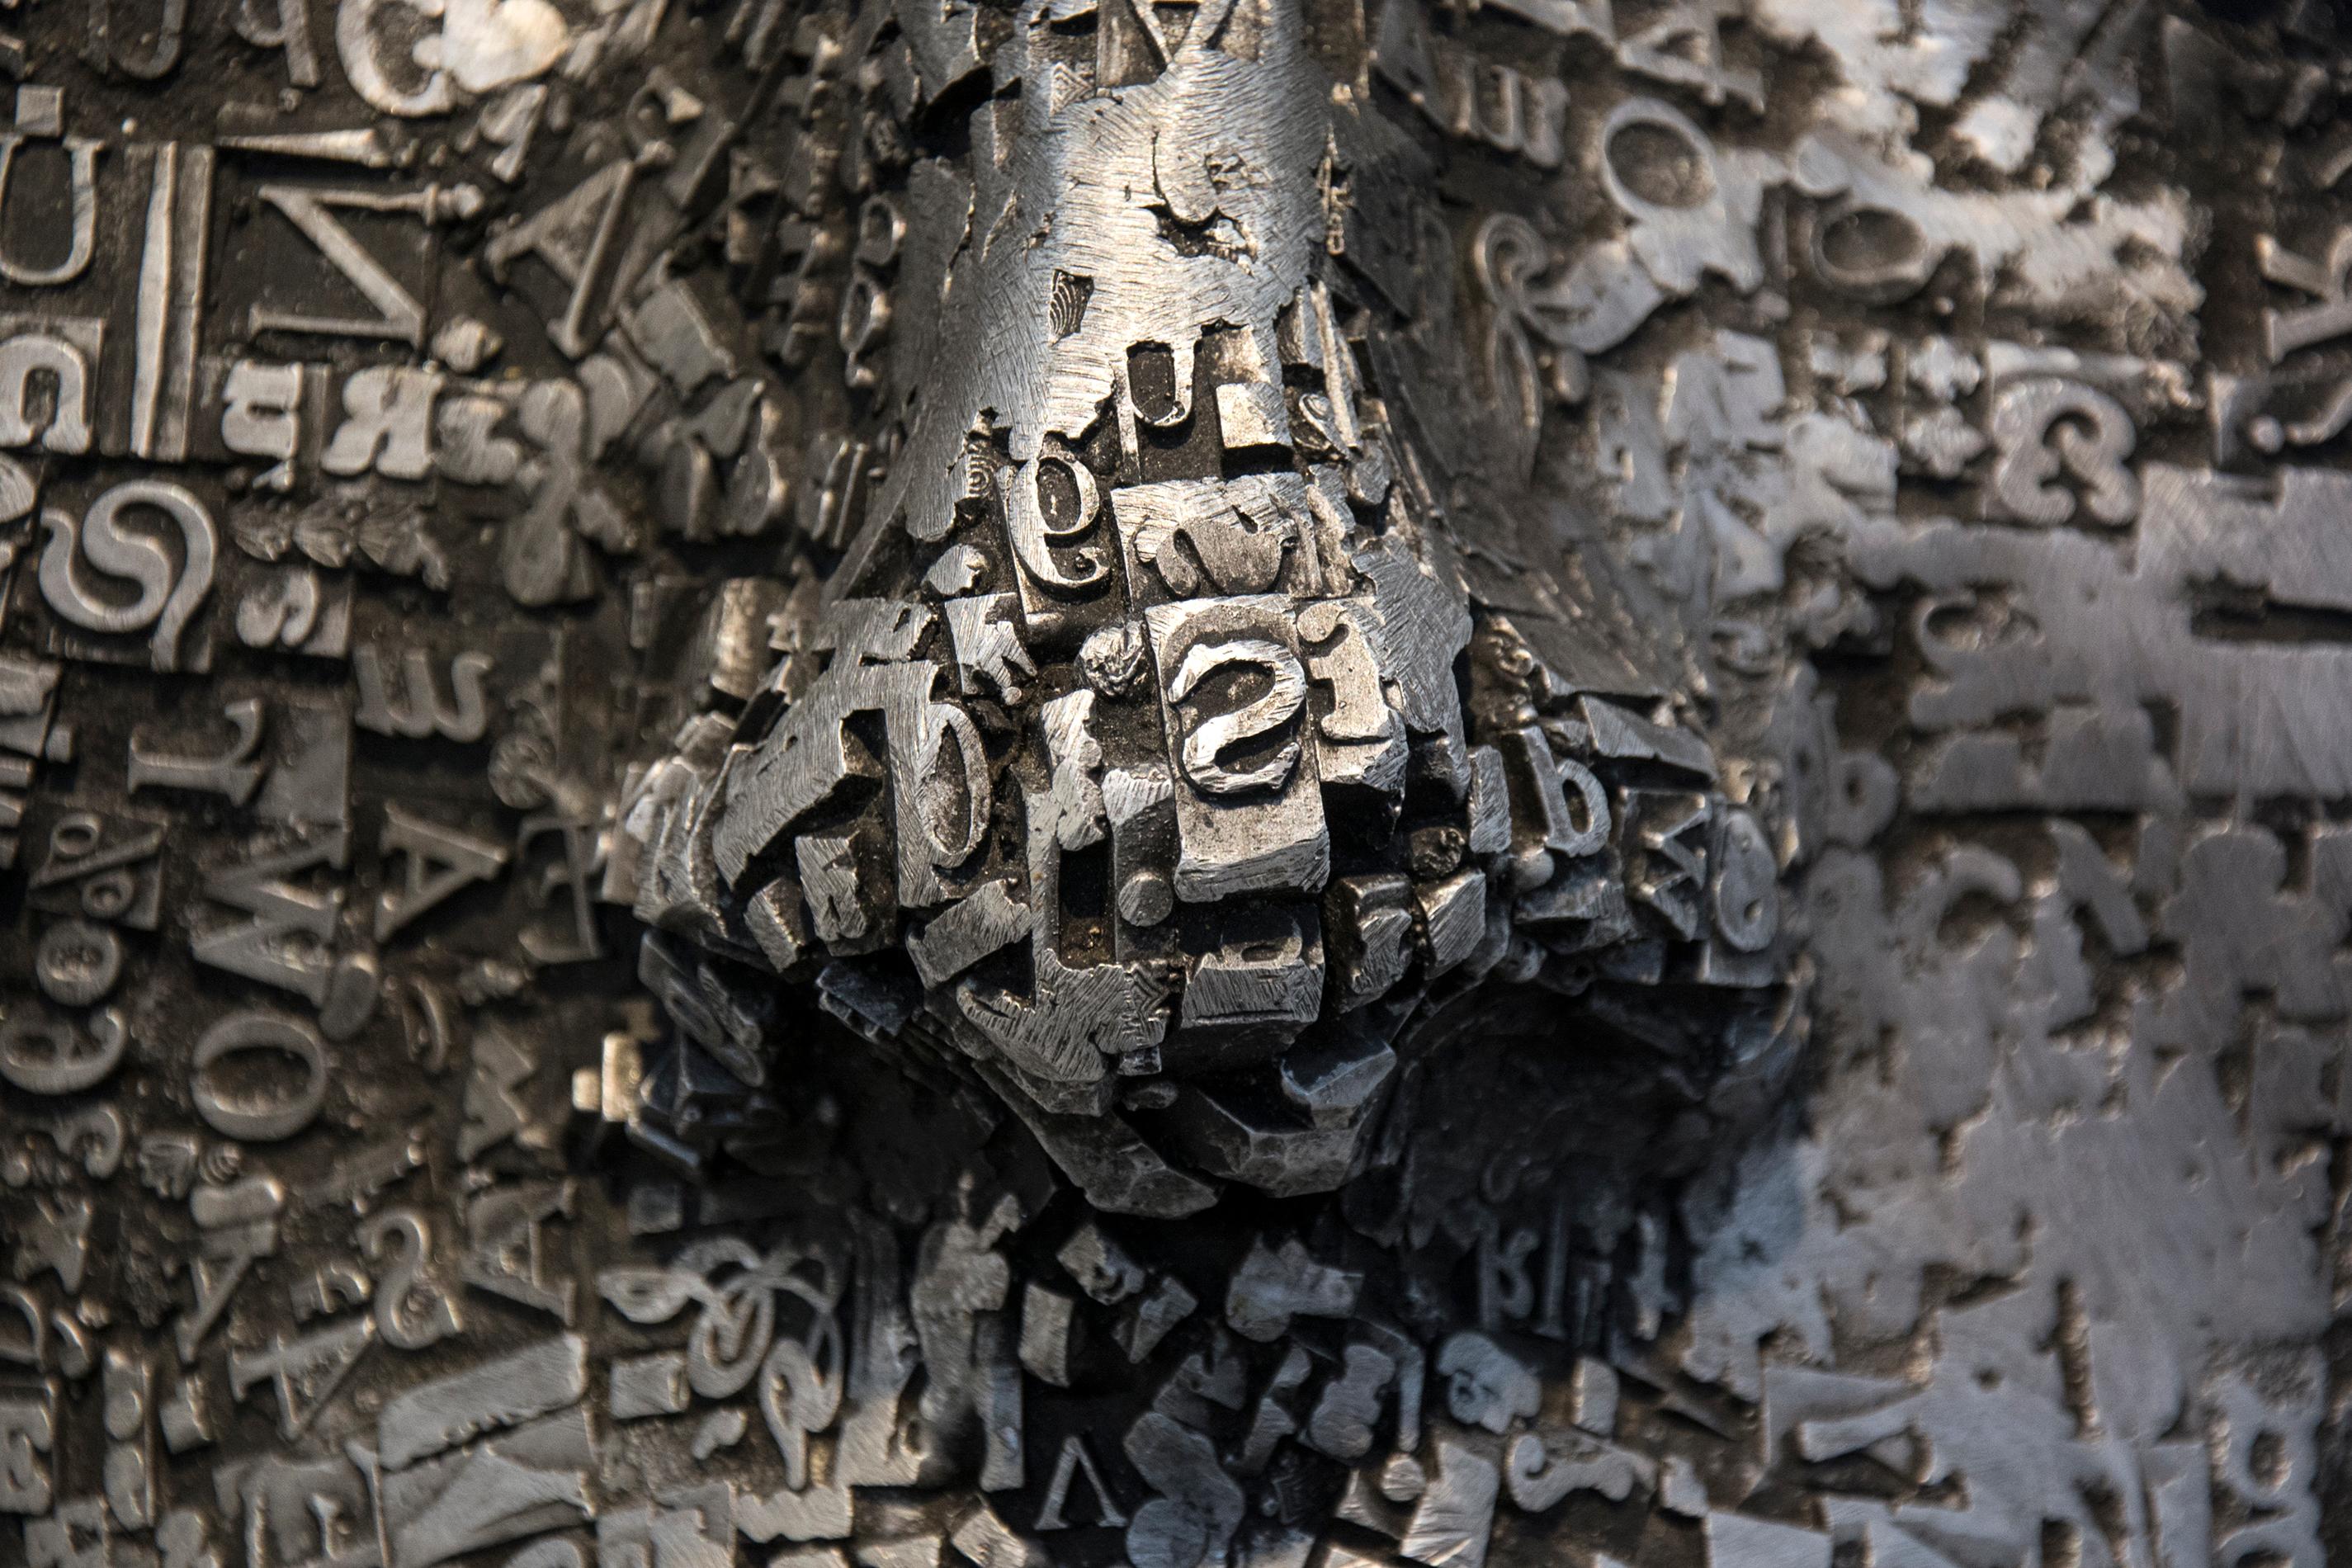 Repurposed metal type was fused in the shape of a mask then cast in aluminum and polished to create a rich surface by artist Dale Dunning. The title of the work palimpsest refers to a surface on which original writing has been erased to make way for